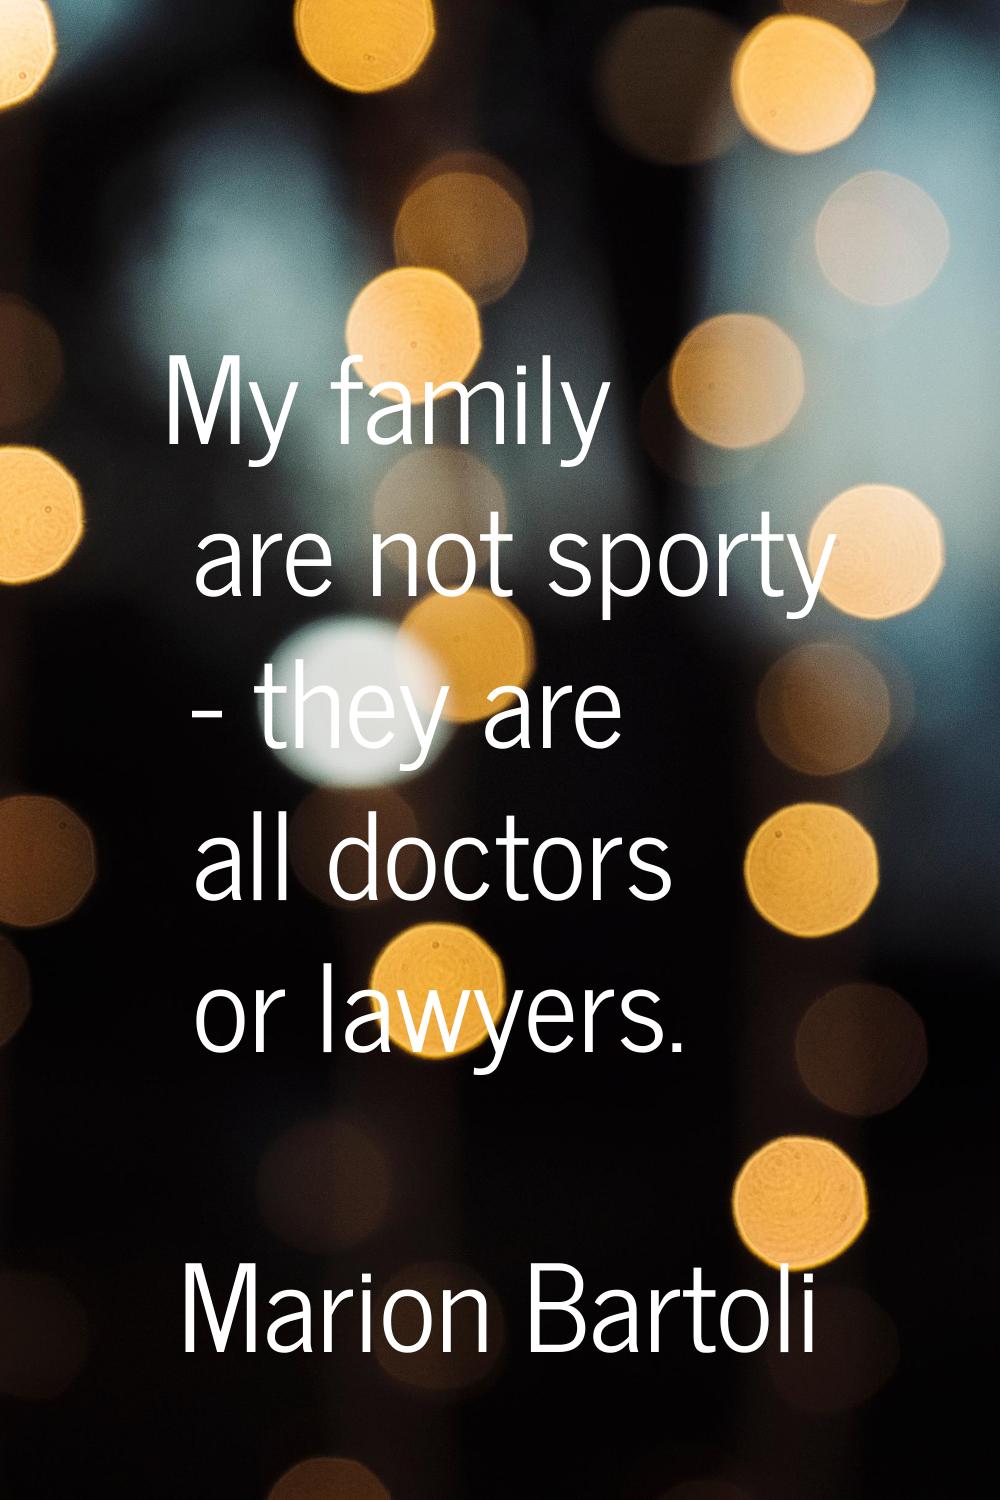 My family are not sporty - they are all doctors or lawyers.